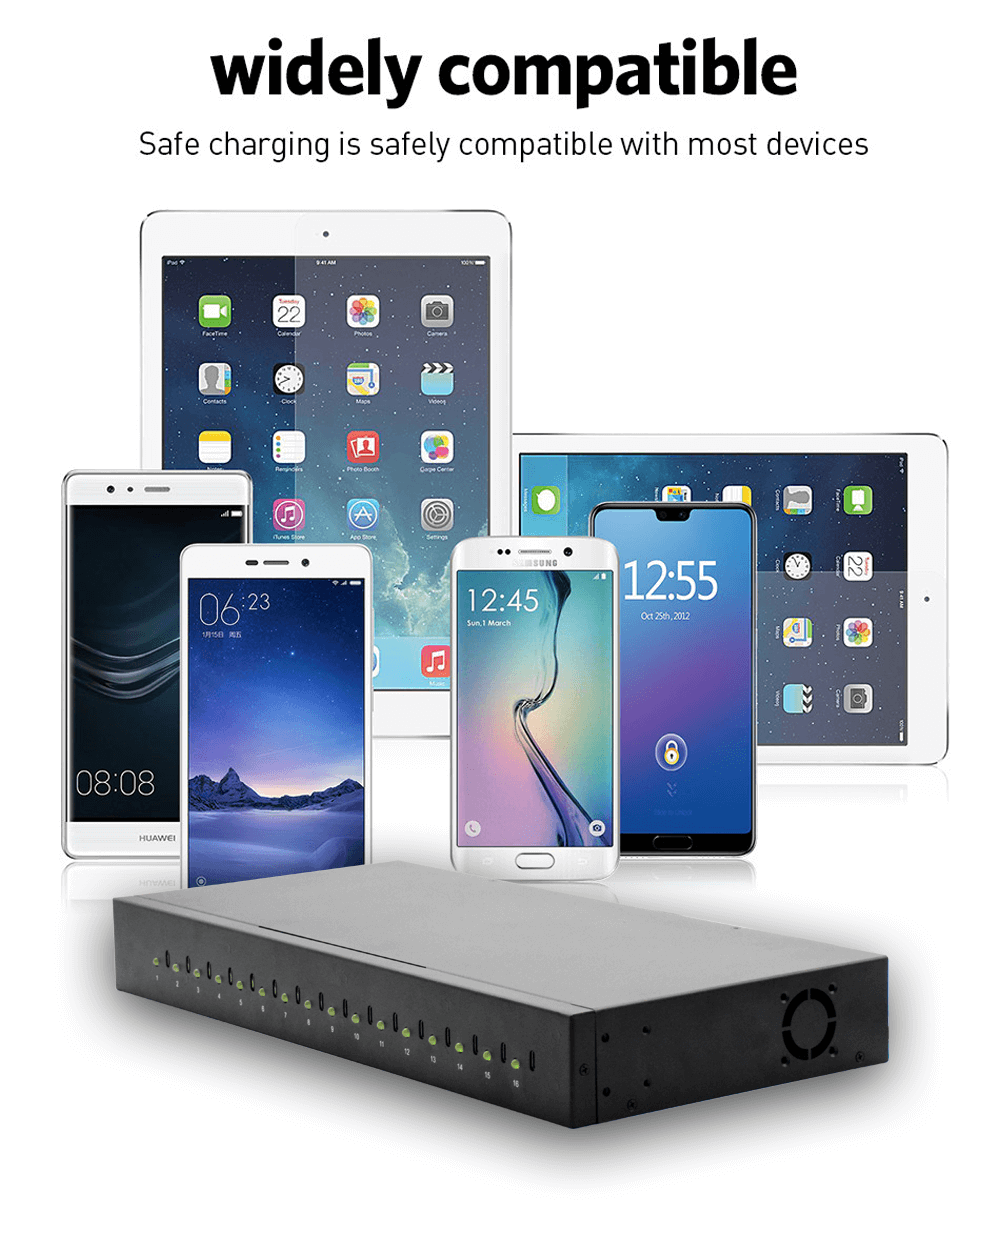 1U rack-mountable USB C charger charges up to 16 tablets